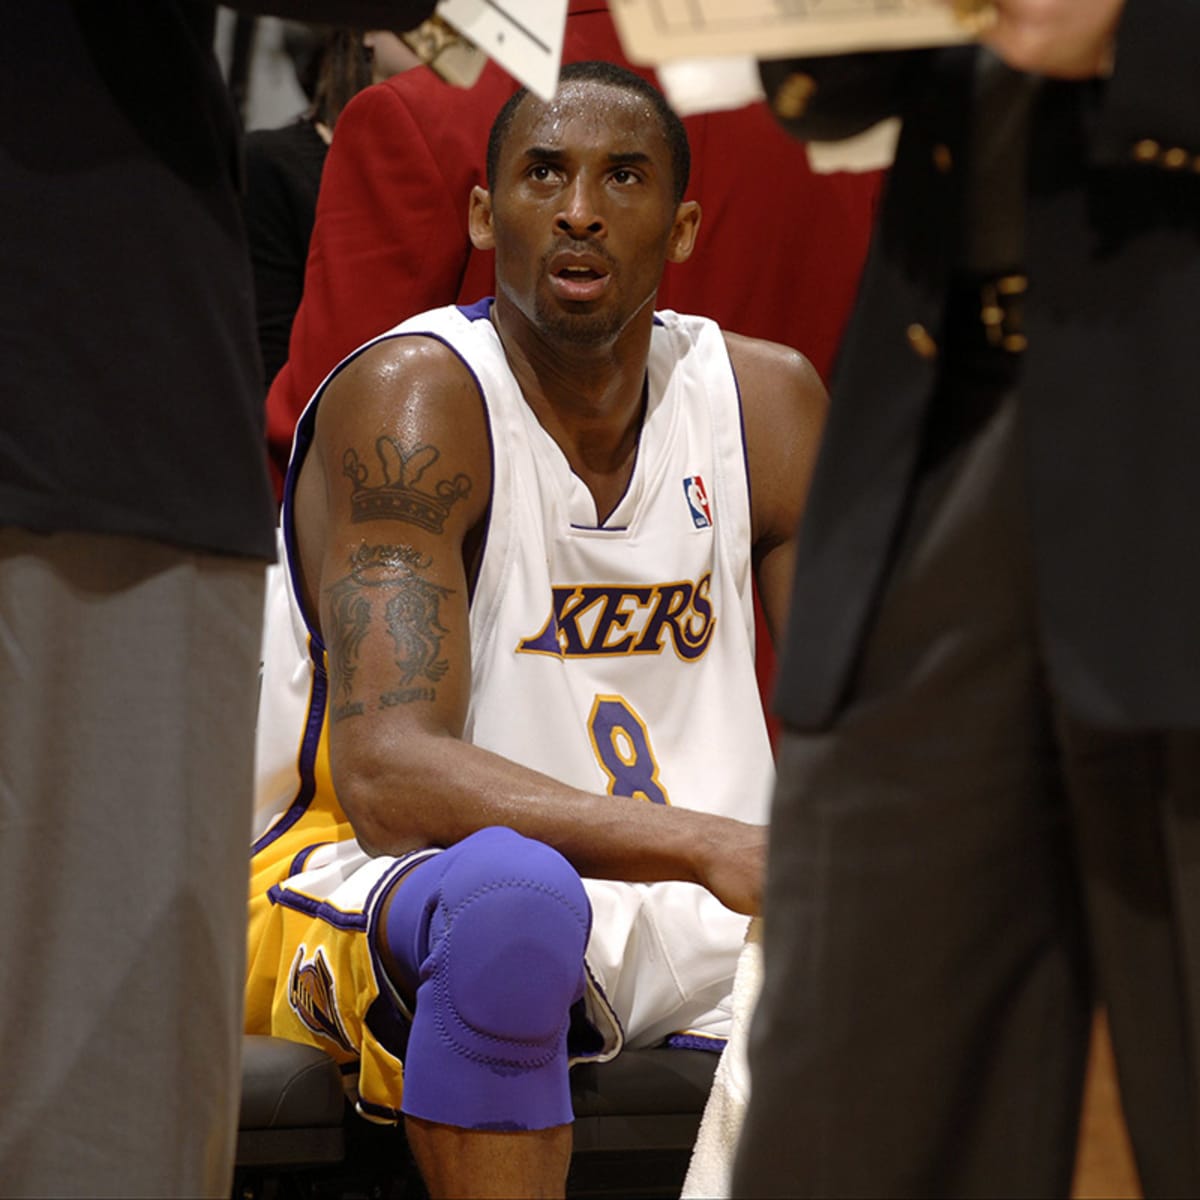 Top Moments: Kobe Bryant drops 81 points on Raptors in 2006